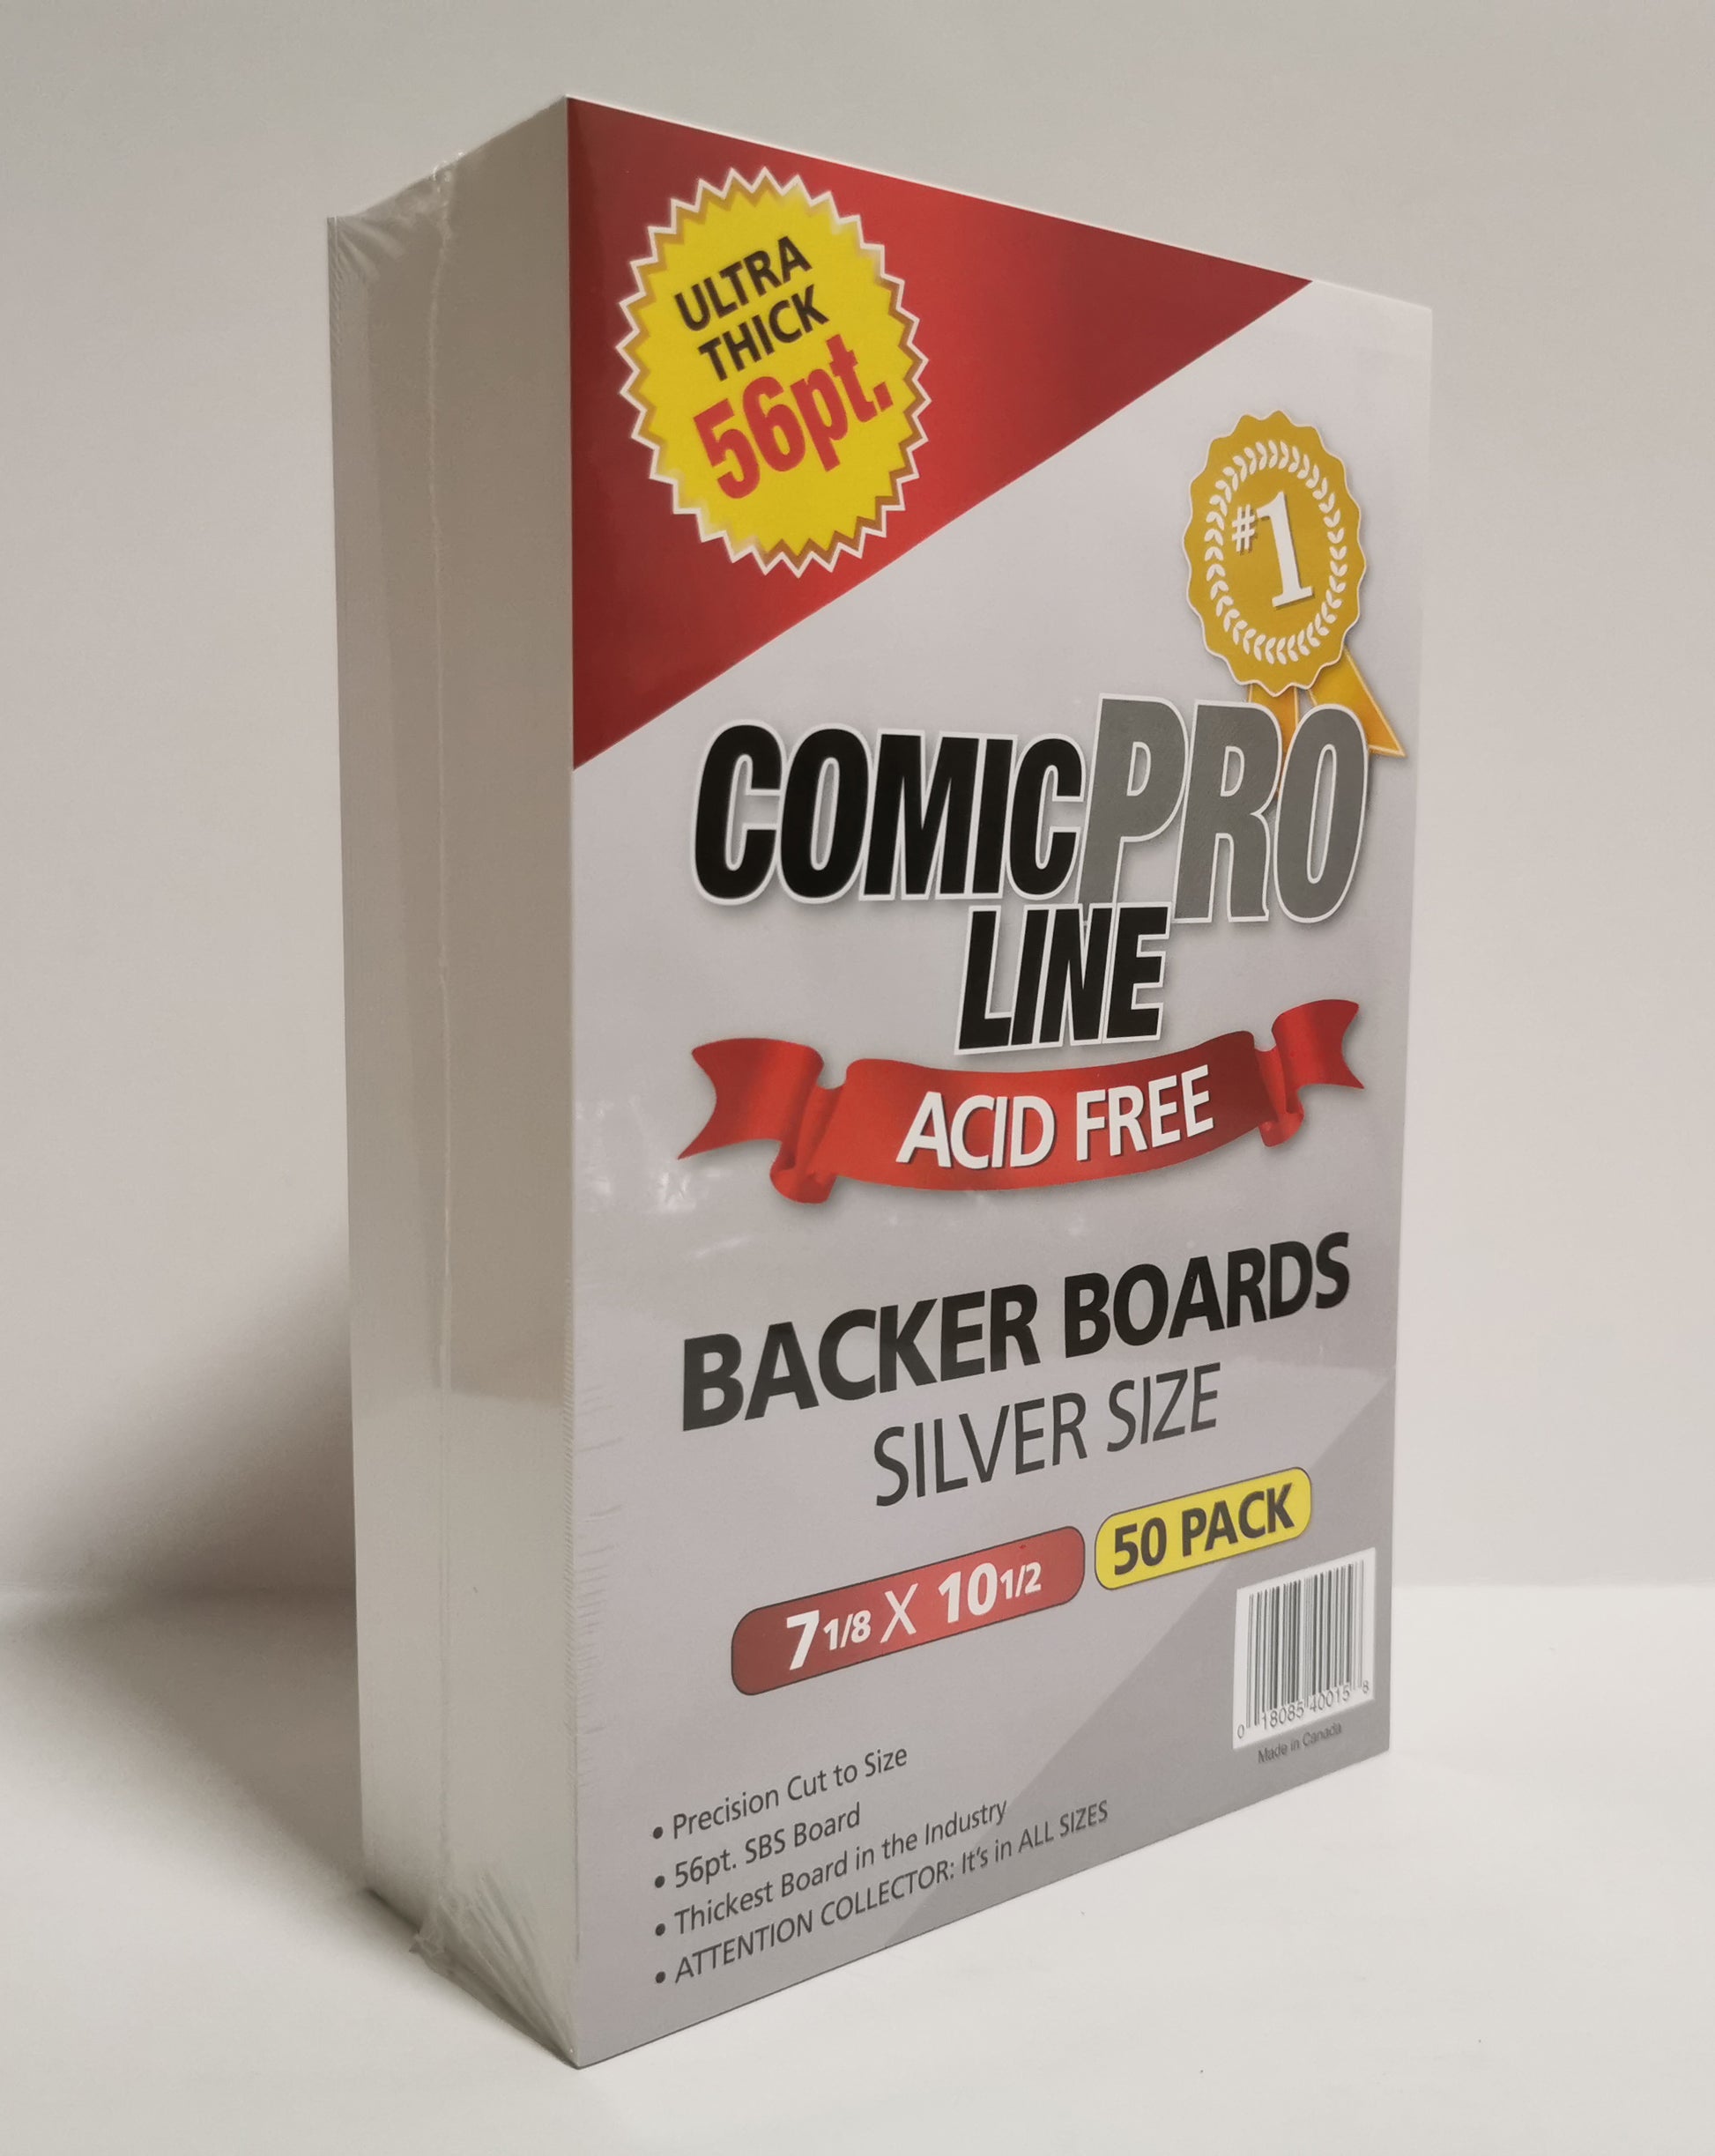 Backing Boards for Silver Comic Book Bag (7 x 10 1/2) - 100 Pack